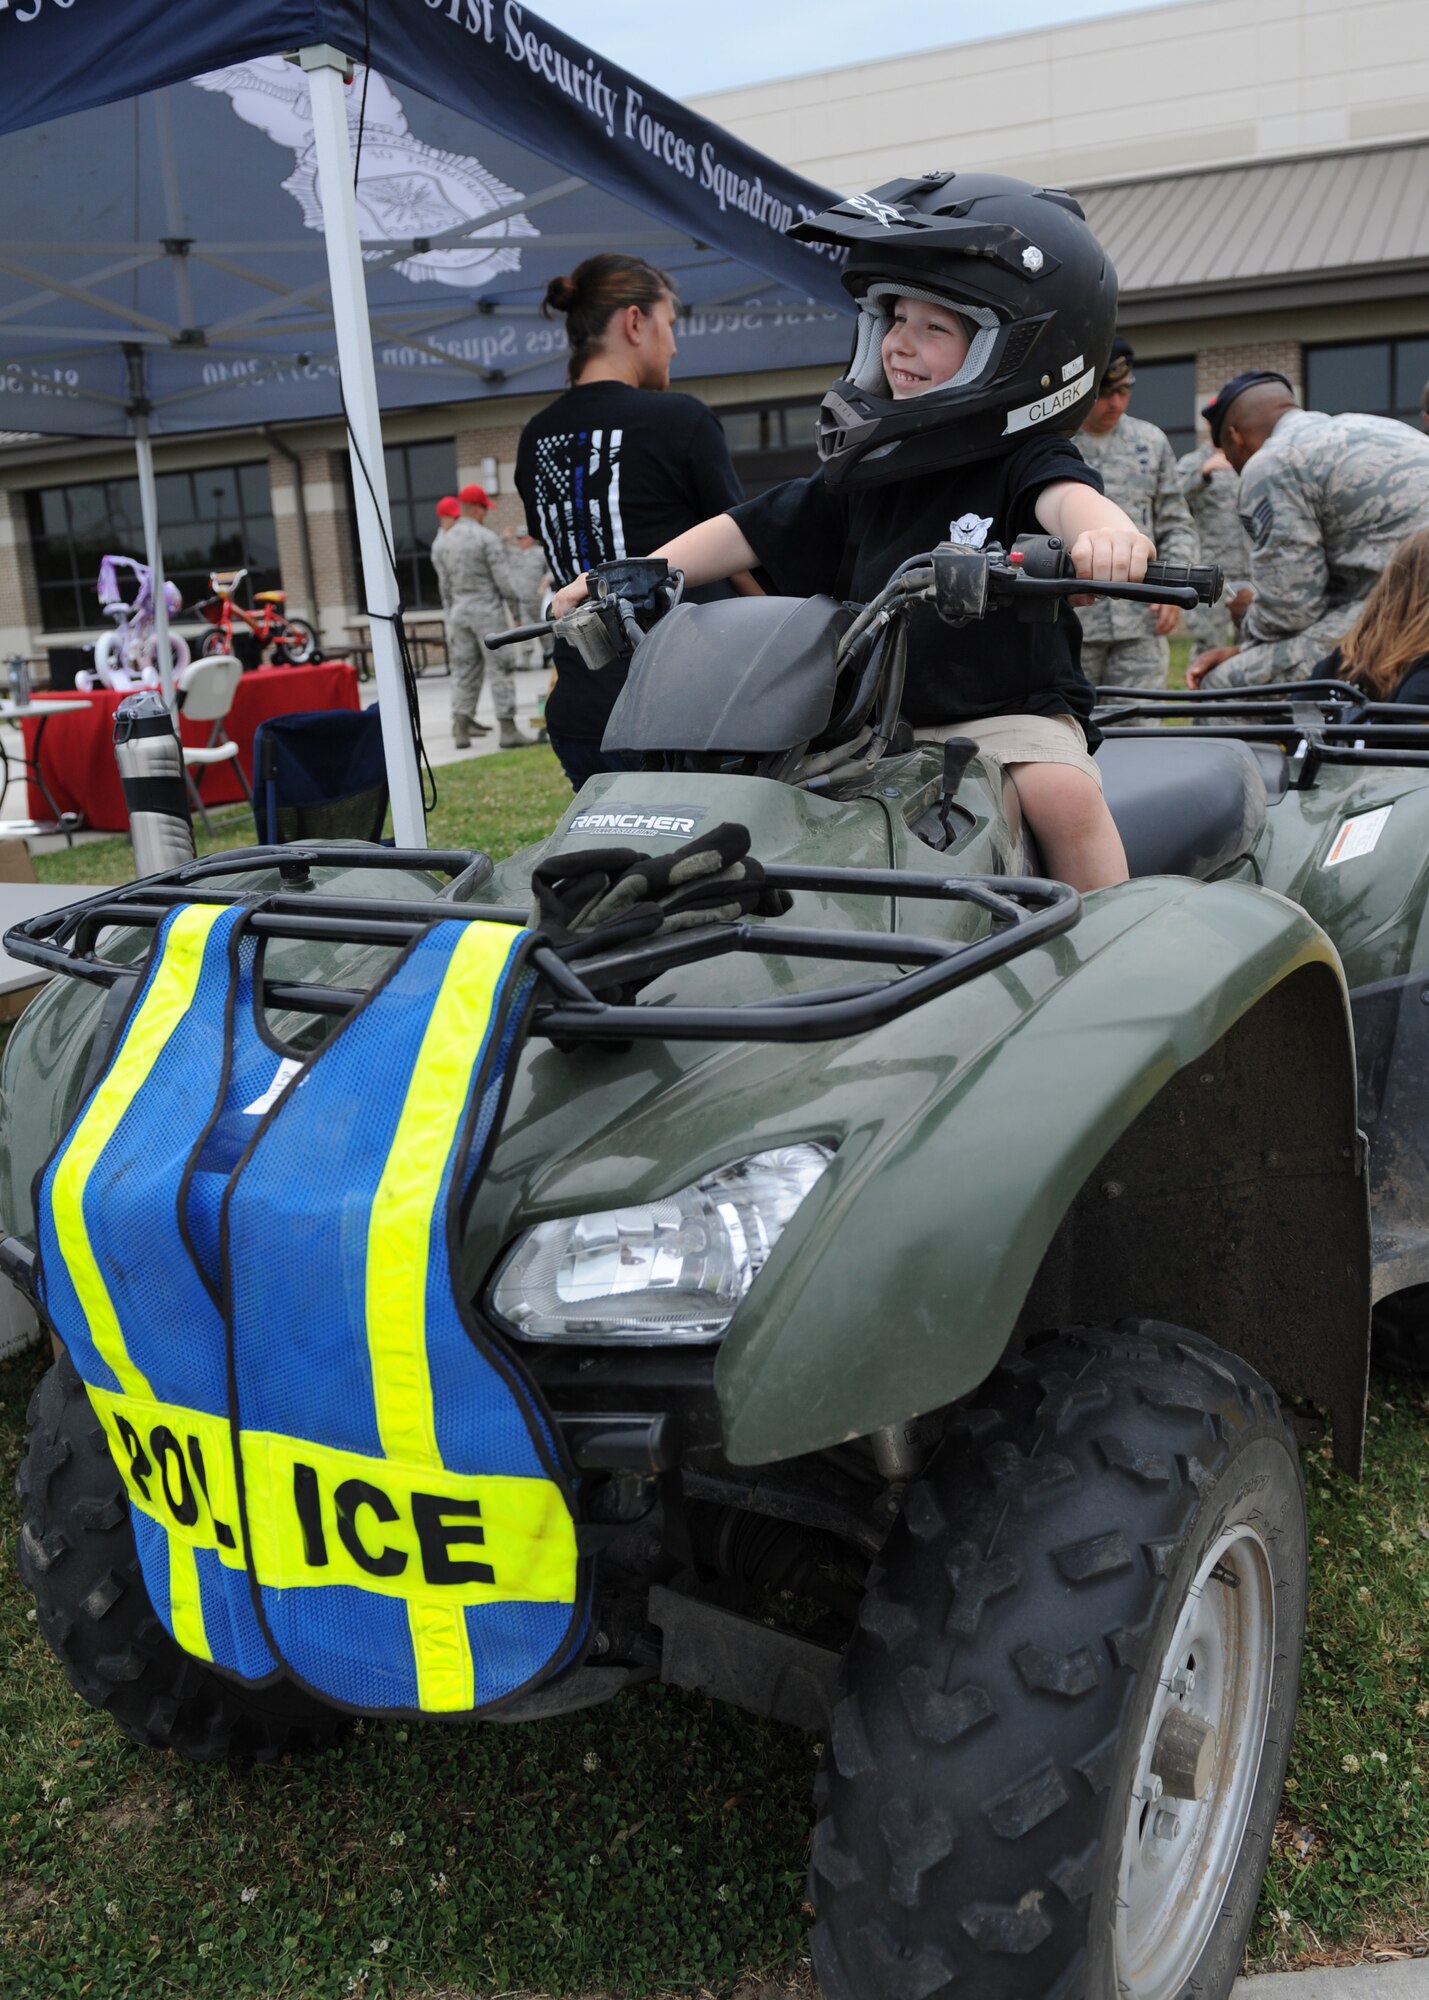 Jaxsen Sproston, son of Maj. Devin Sproston, 81st Security Forces Squadron commander, sits on an all-terrain vehicle during the 81st SFS Fun Day at the base exchange May 16, 2016, Keesler Air Force Base, Miss. The event was held during National Police Week, which recognizes the service of law enforcement men and women who put their lives at risk every day. (U.S. Air Force photo by Kemberly Groue)